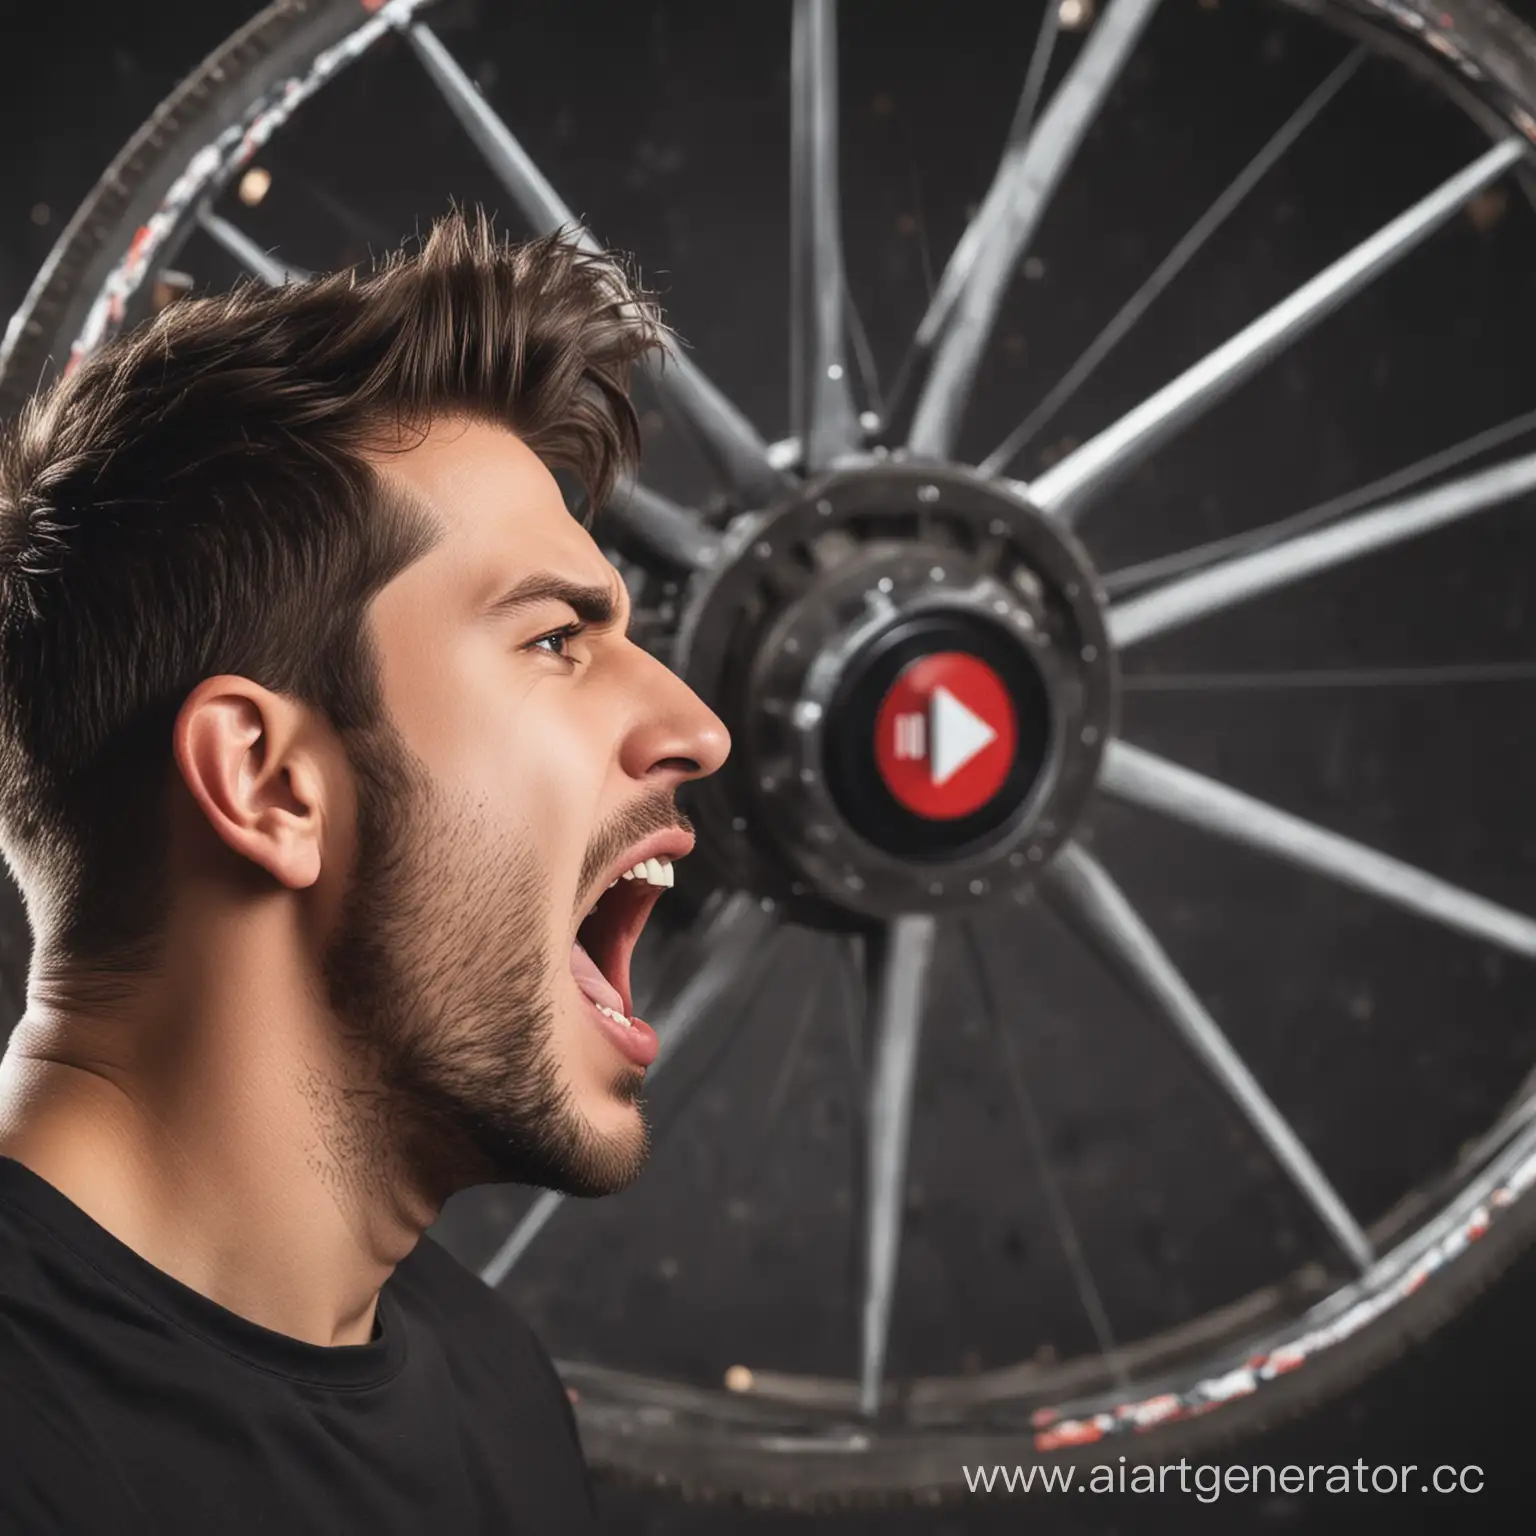 Male-Profile-Shouting-with-Giant-Wheel-Background